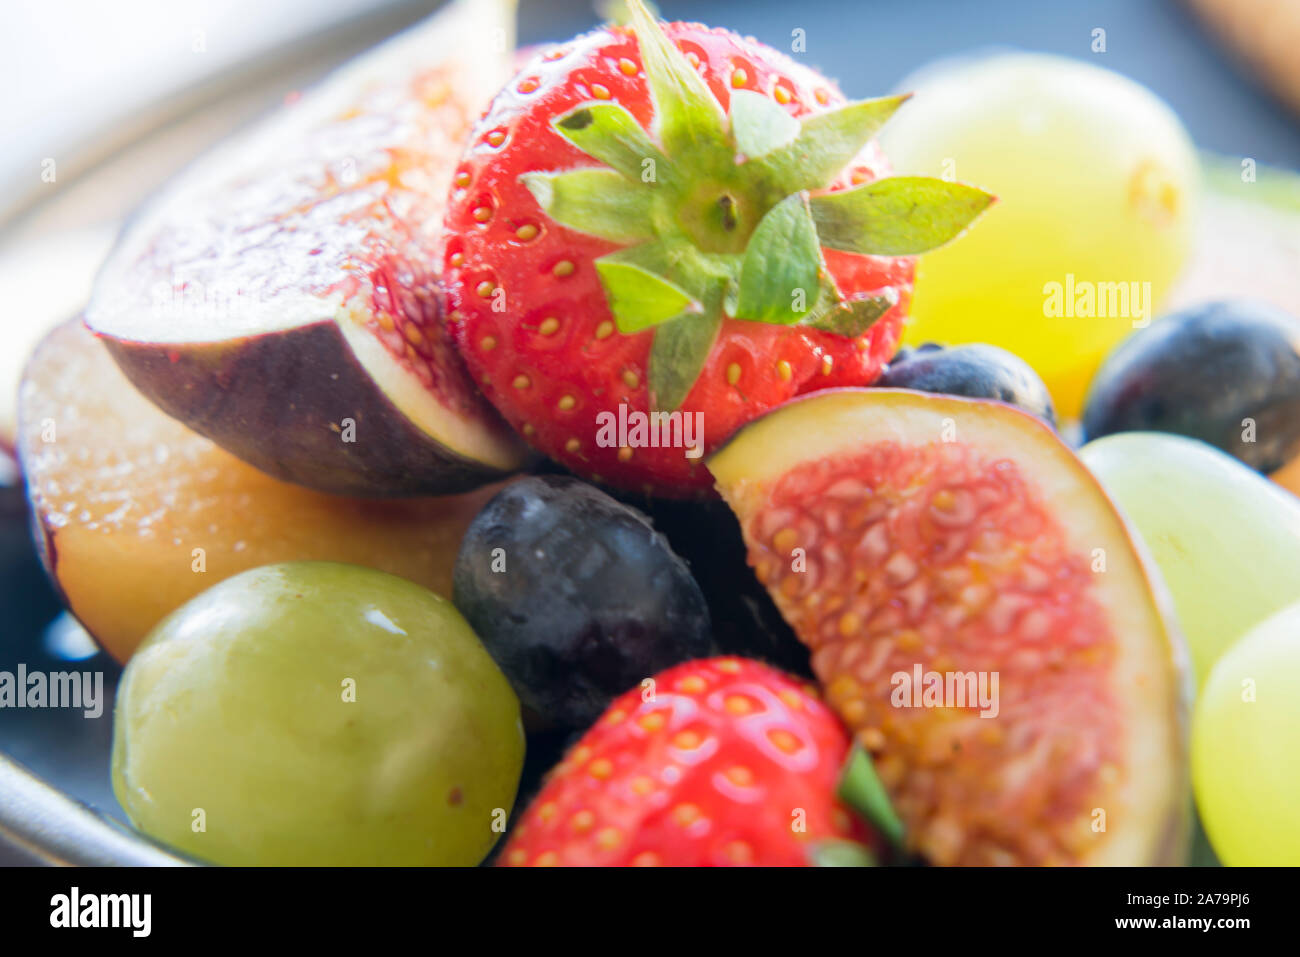 Mixed Fruit with strawberries, close up. Stock Photo